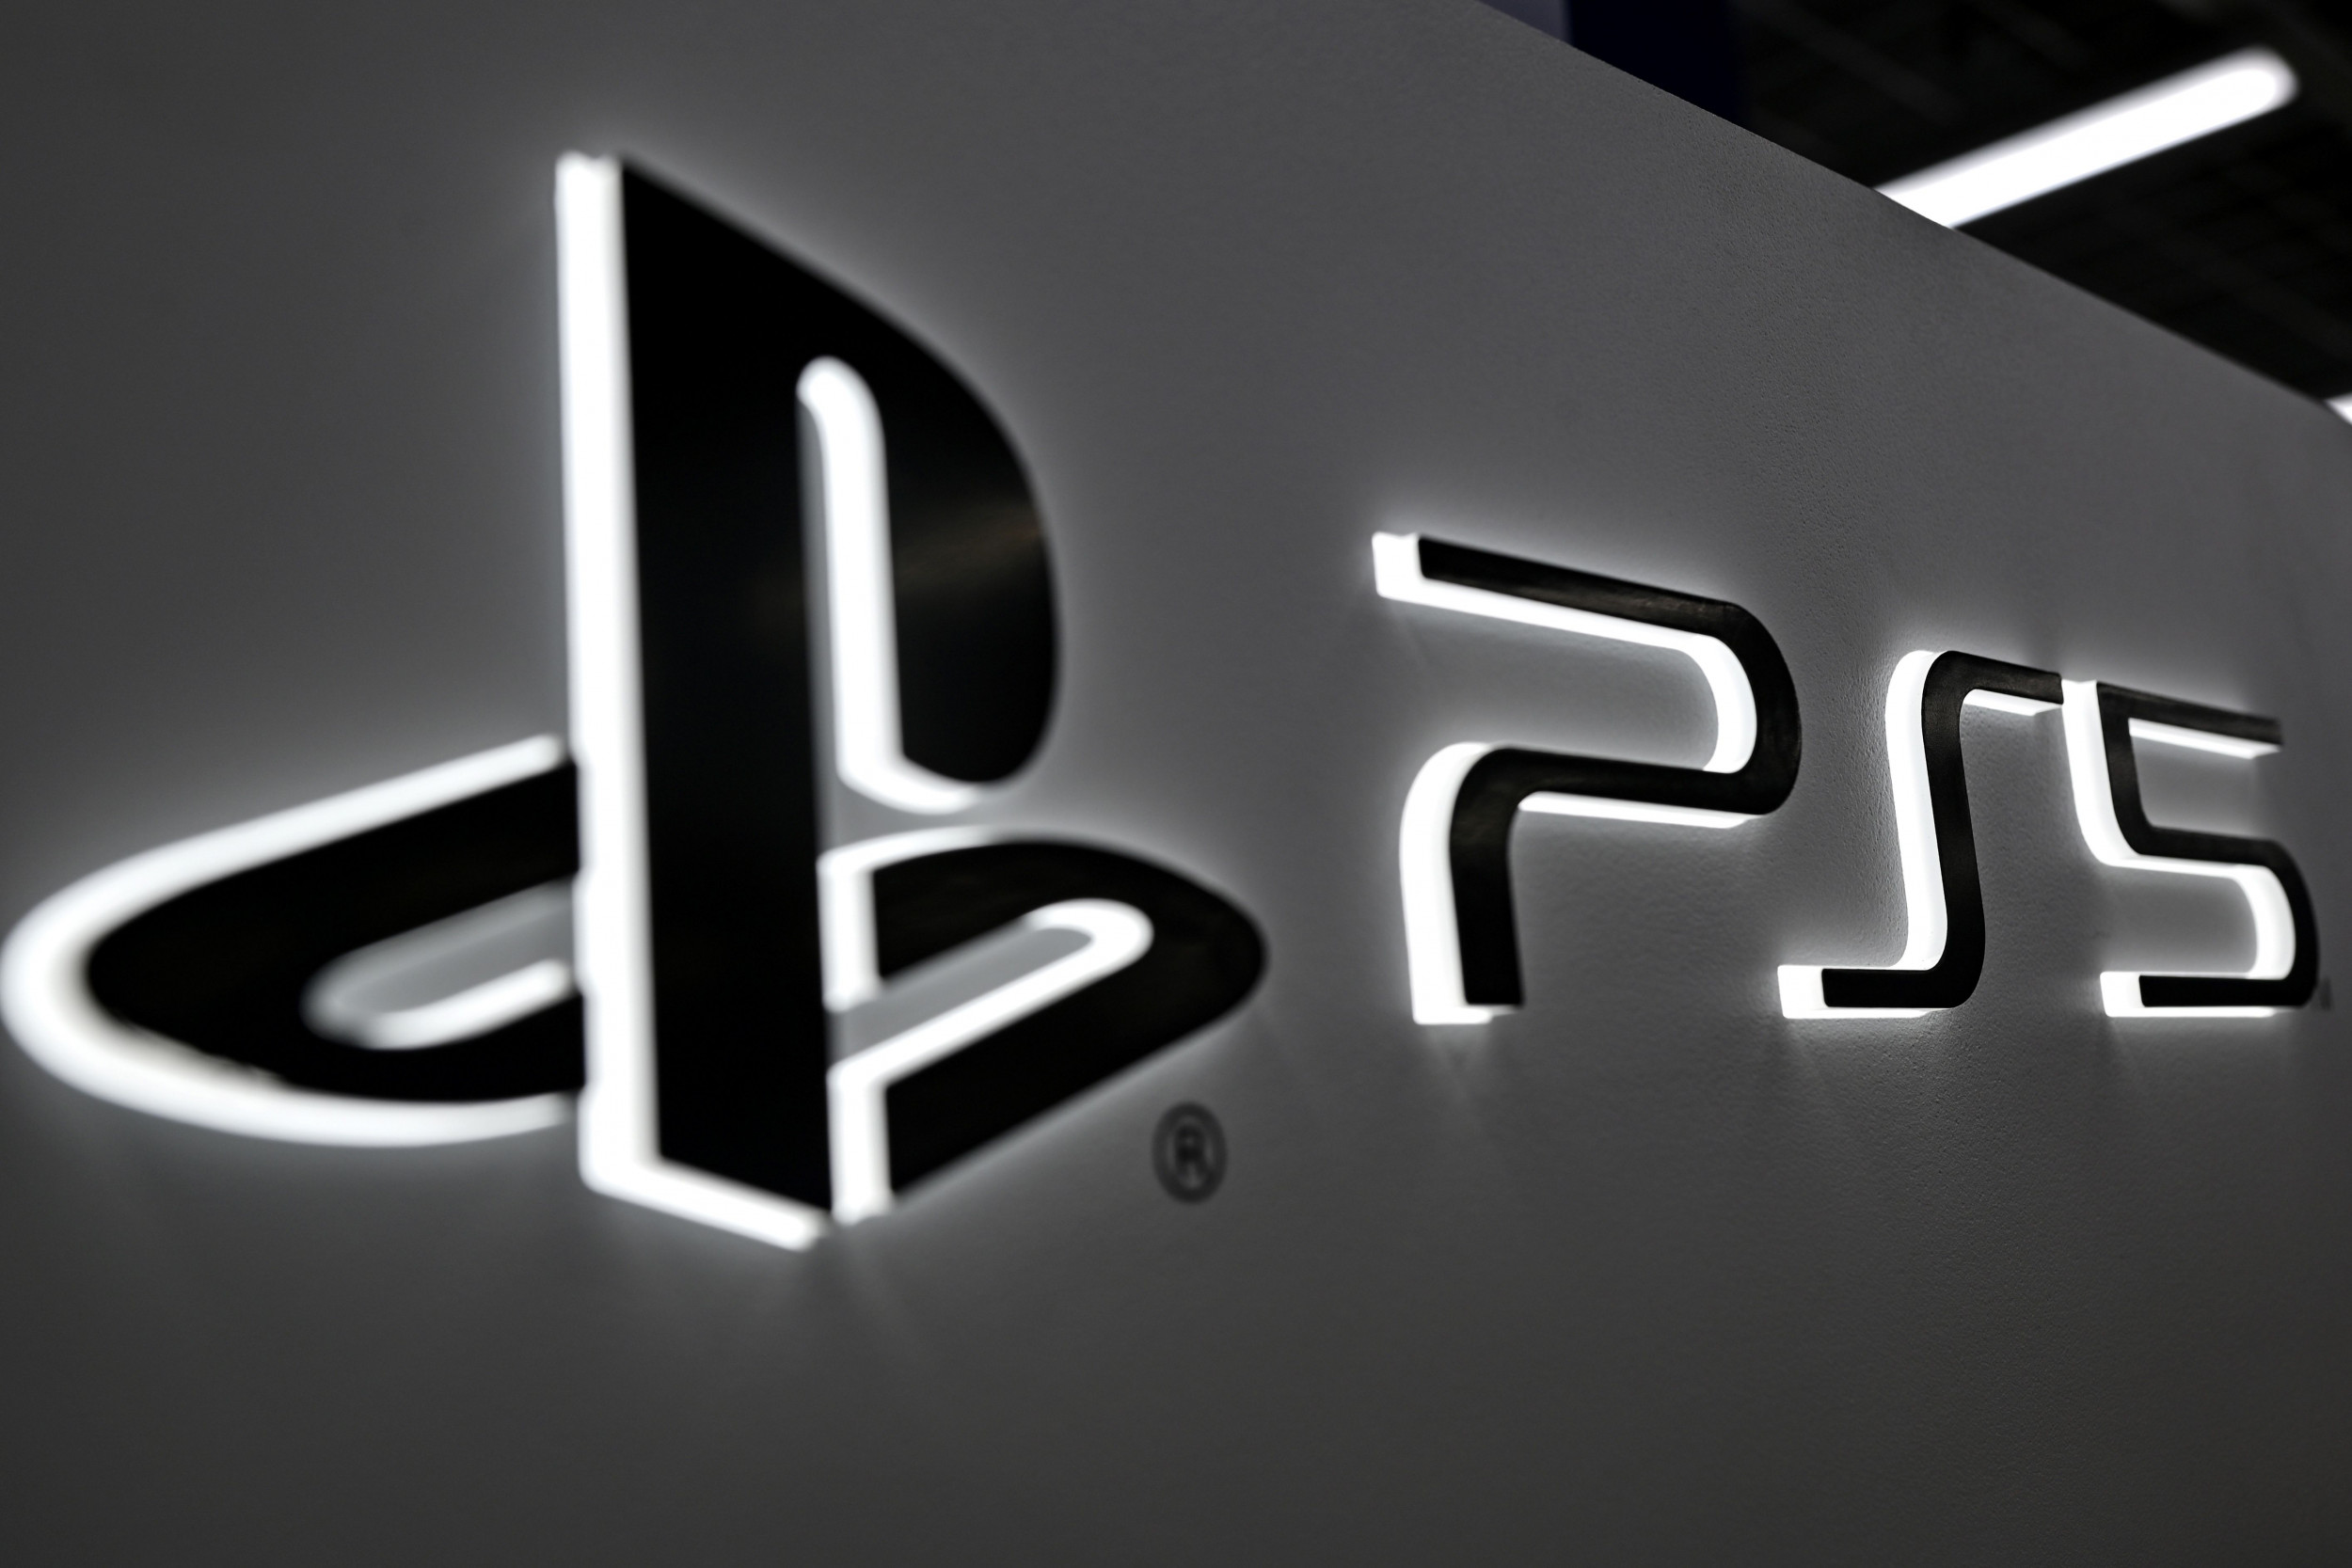 PS5 Update for Target, Walmart, Best Buy and more